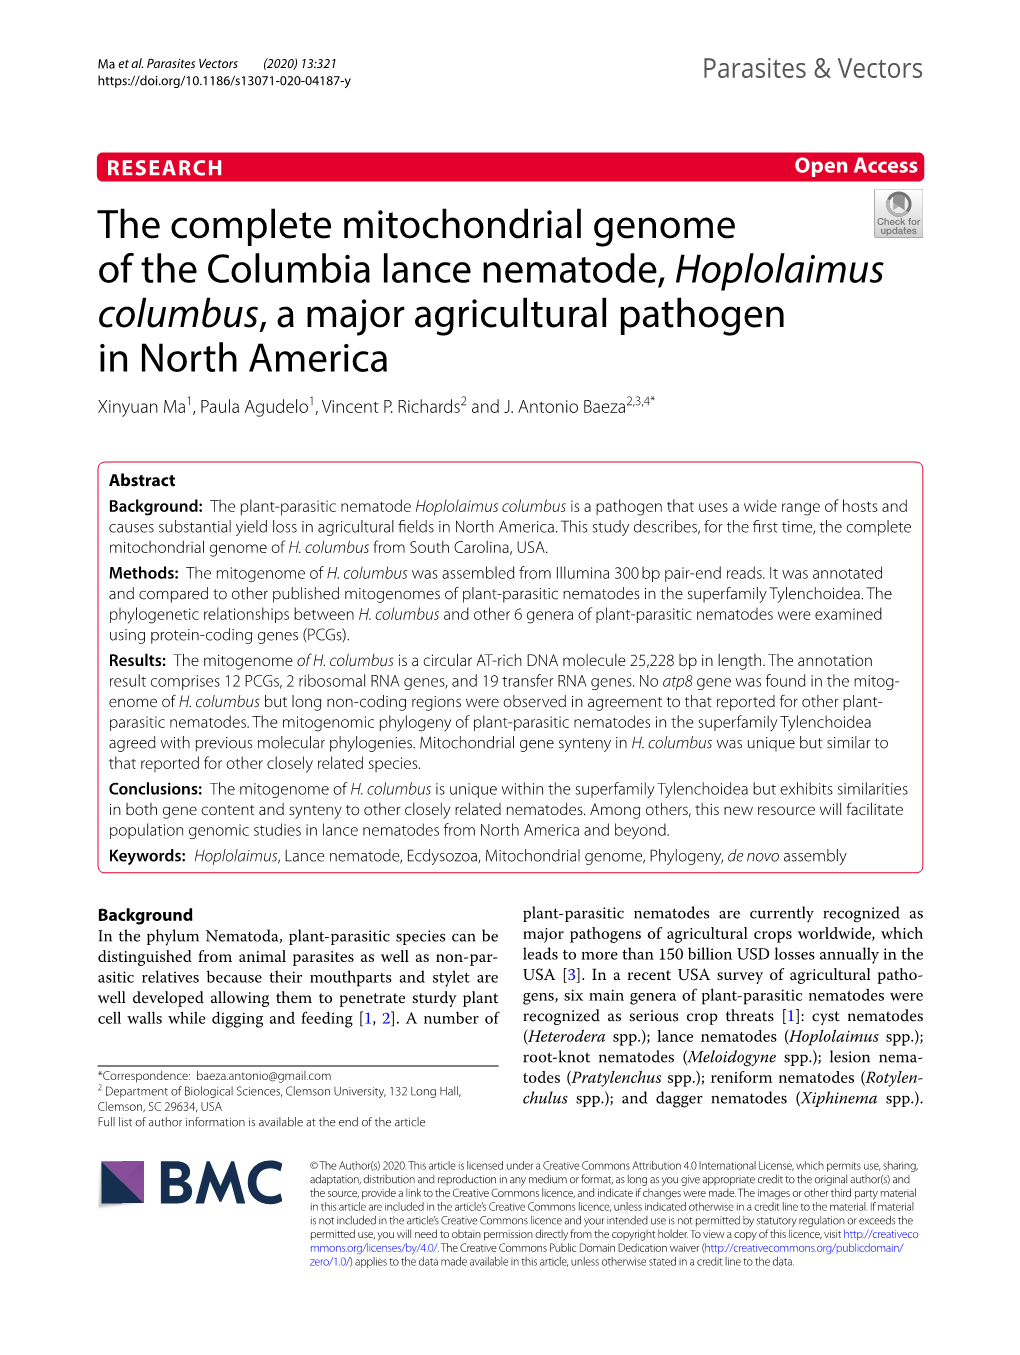 The Complete Mitochondrial Genome of the Columbia Lance Nematode